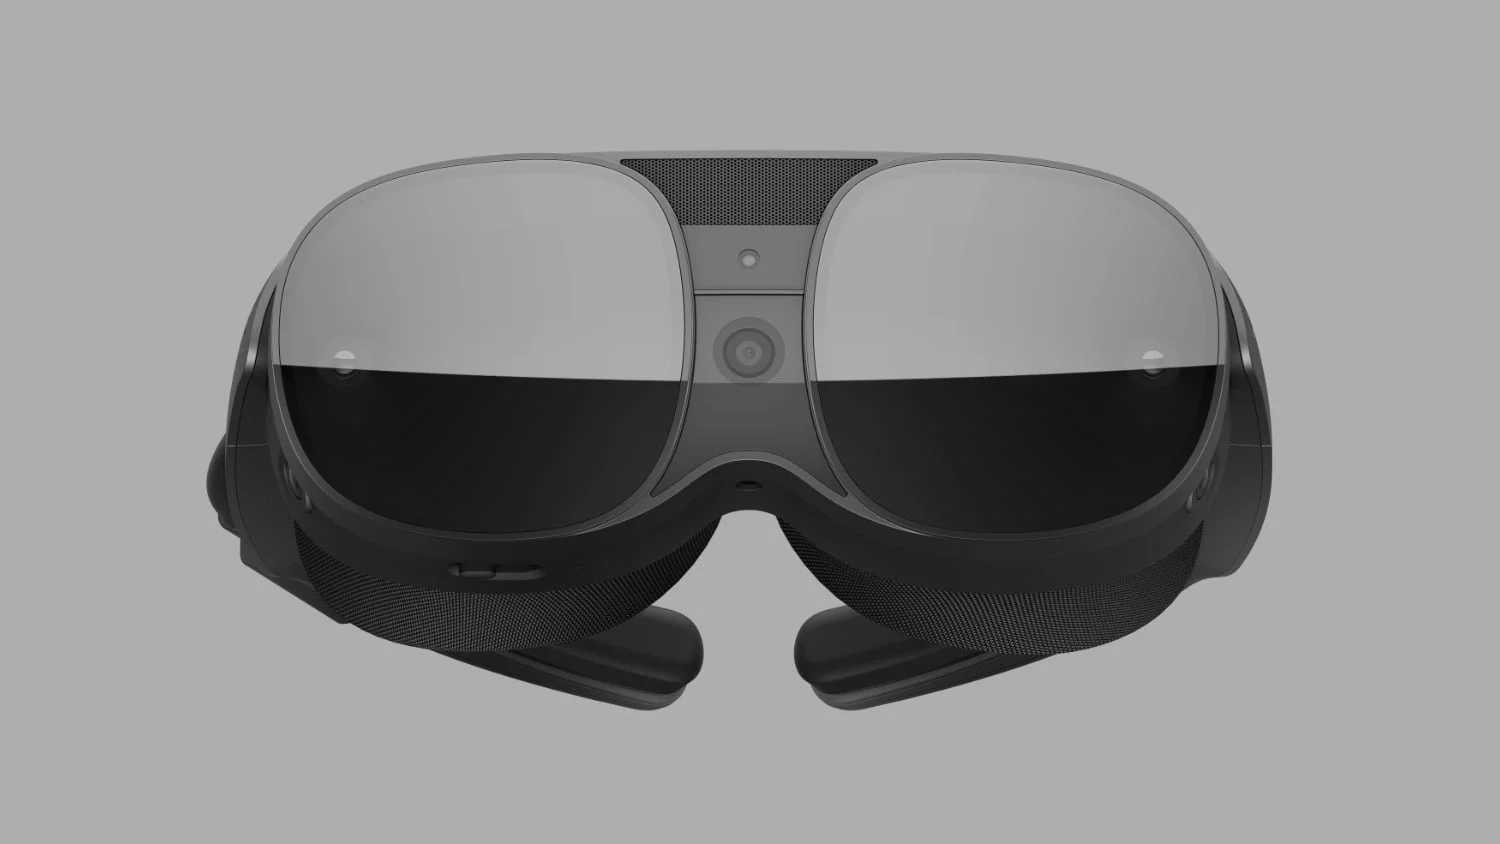 HTC PR photo of the HTC XR Elite VR headset against a gray background